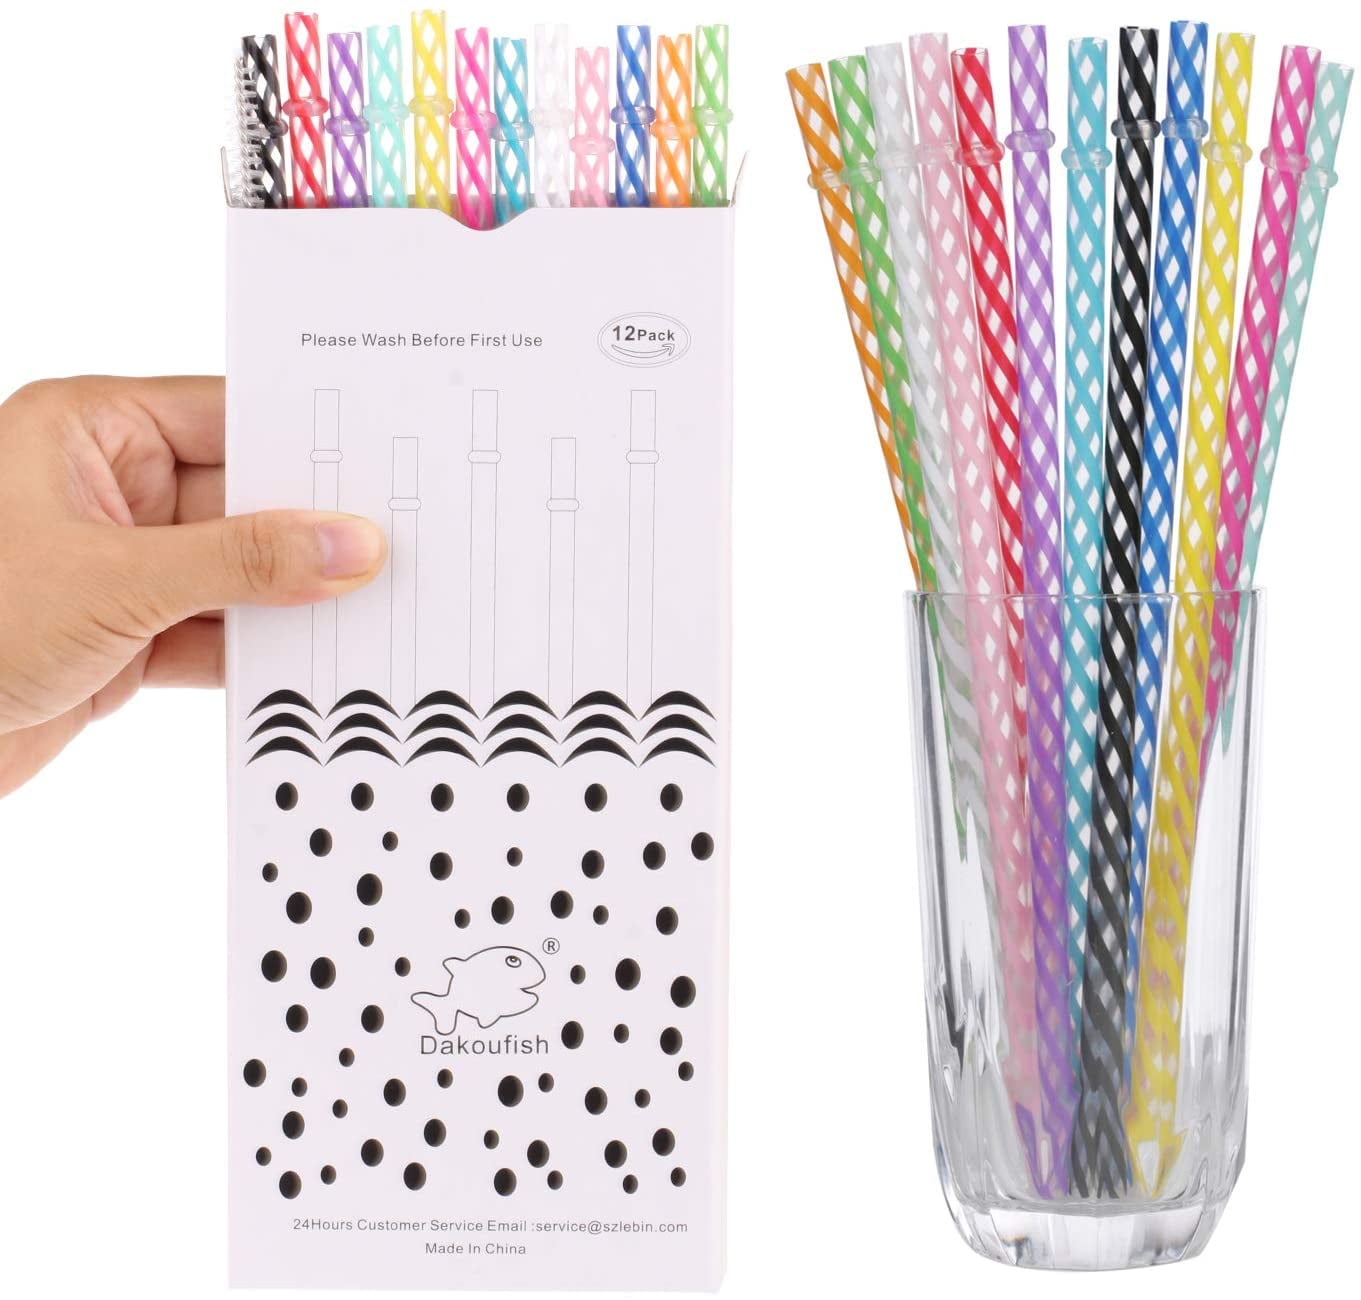 11 Inch Long Flexible Magenta Reusable Straws with Clear Straw